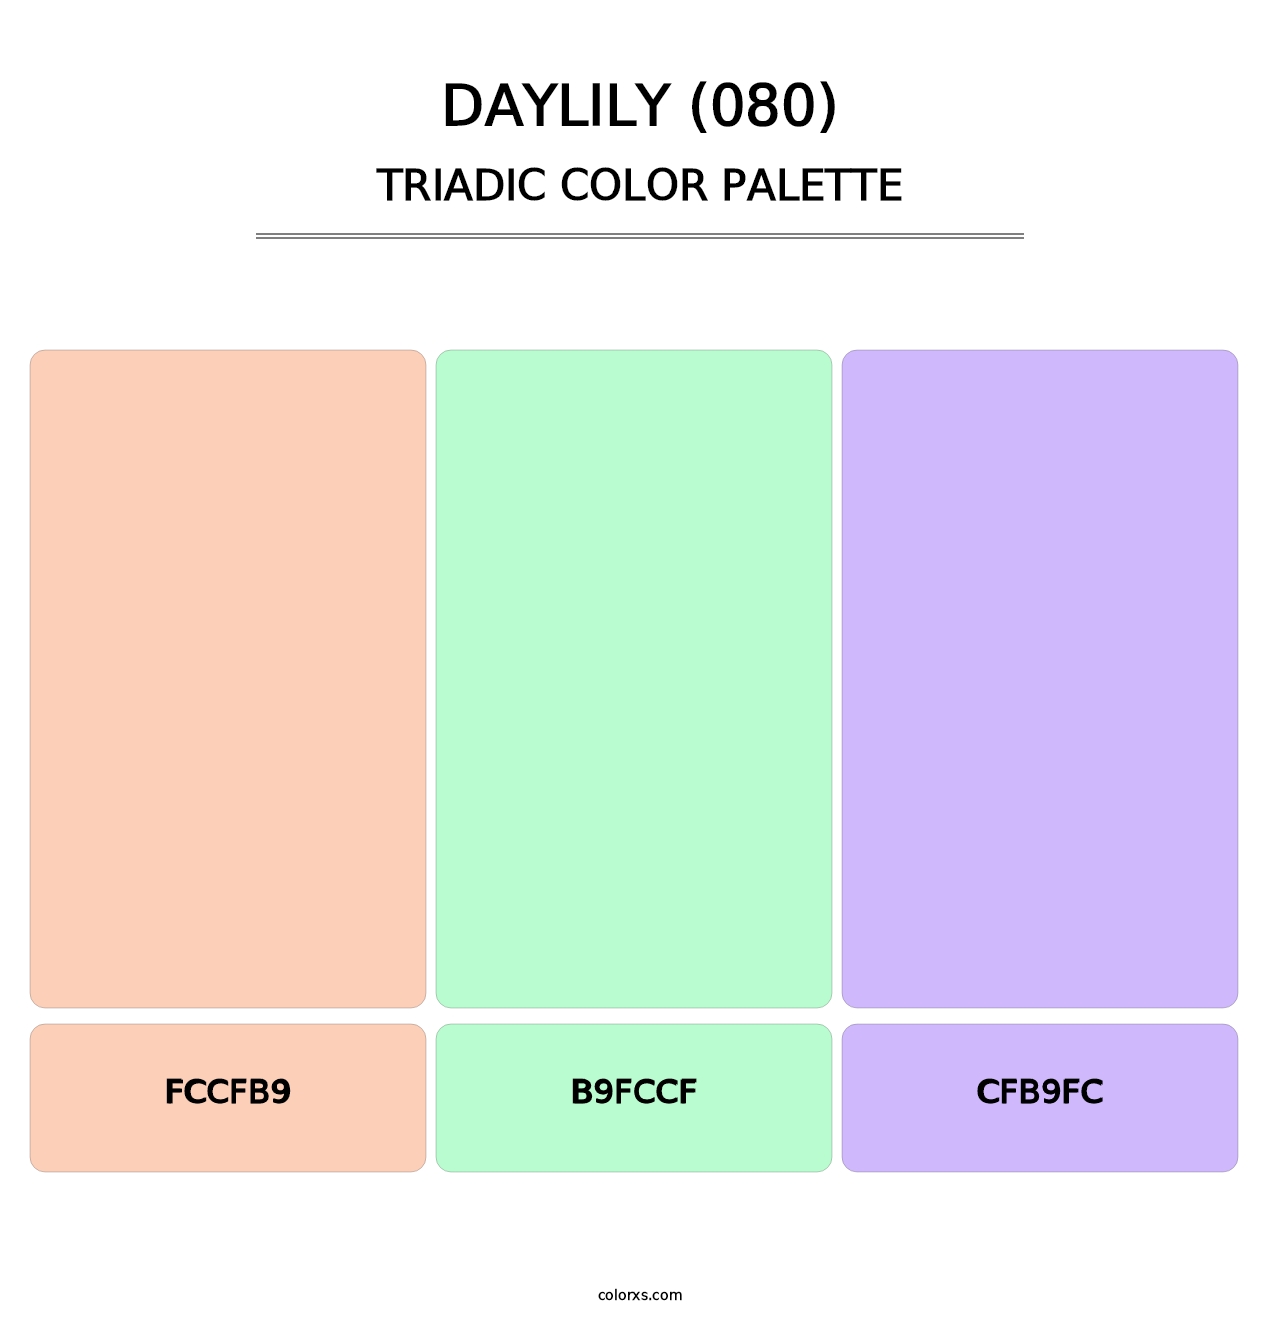 Daylily (080) - Triadic Color Palette